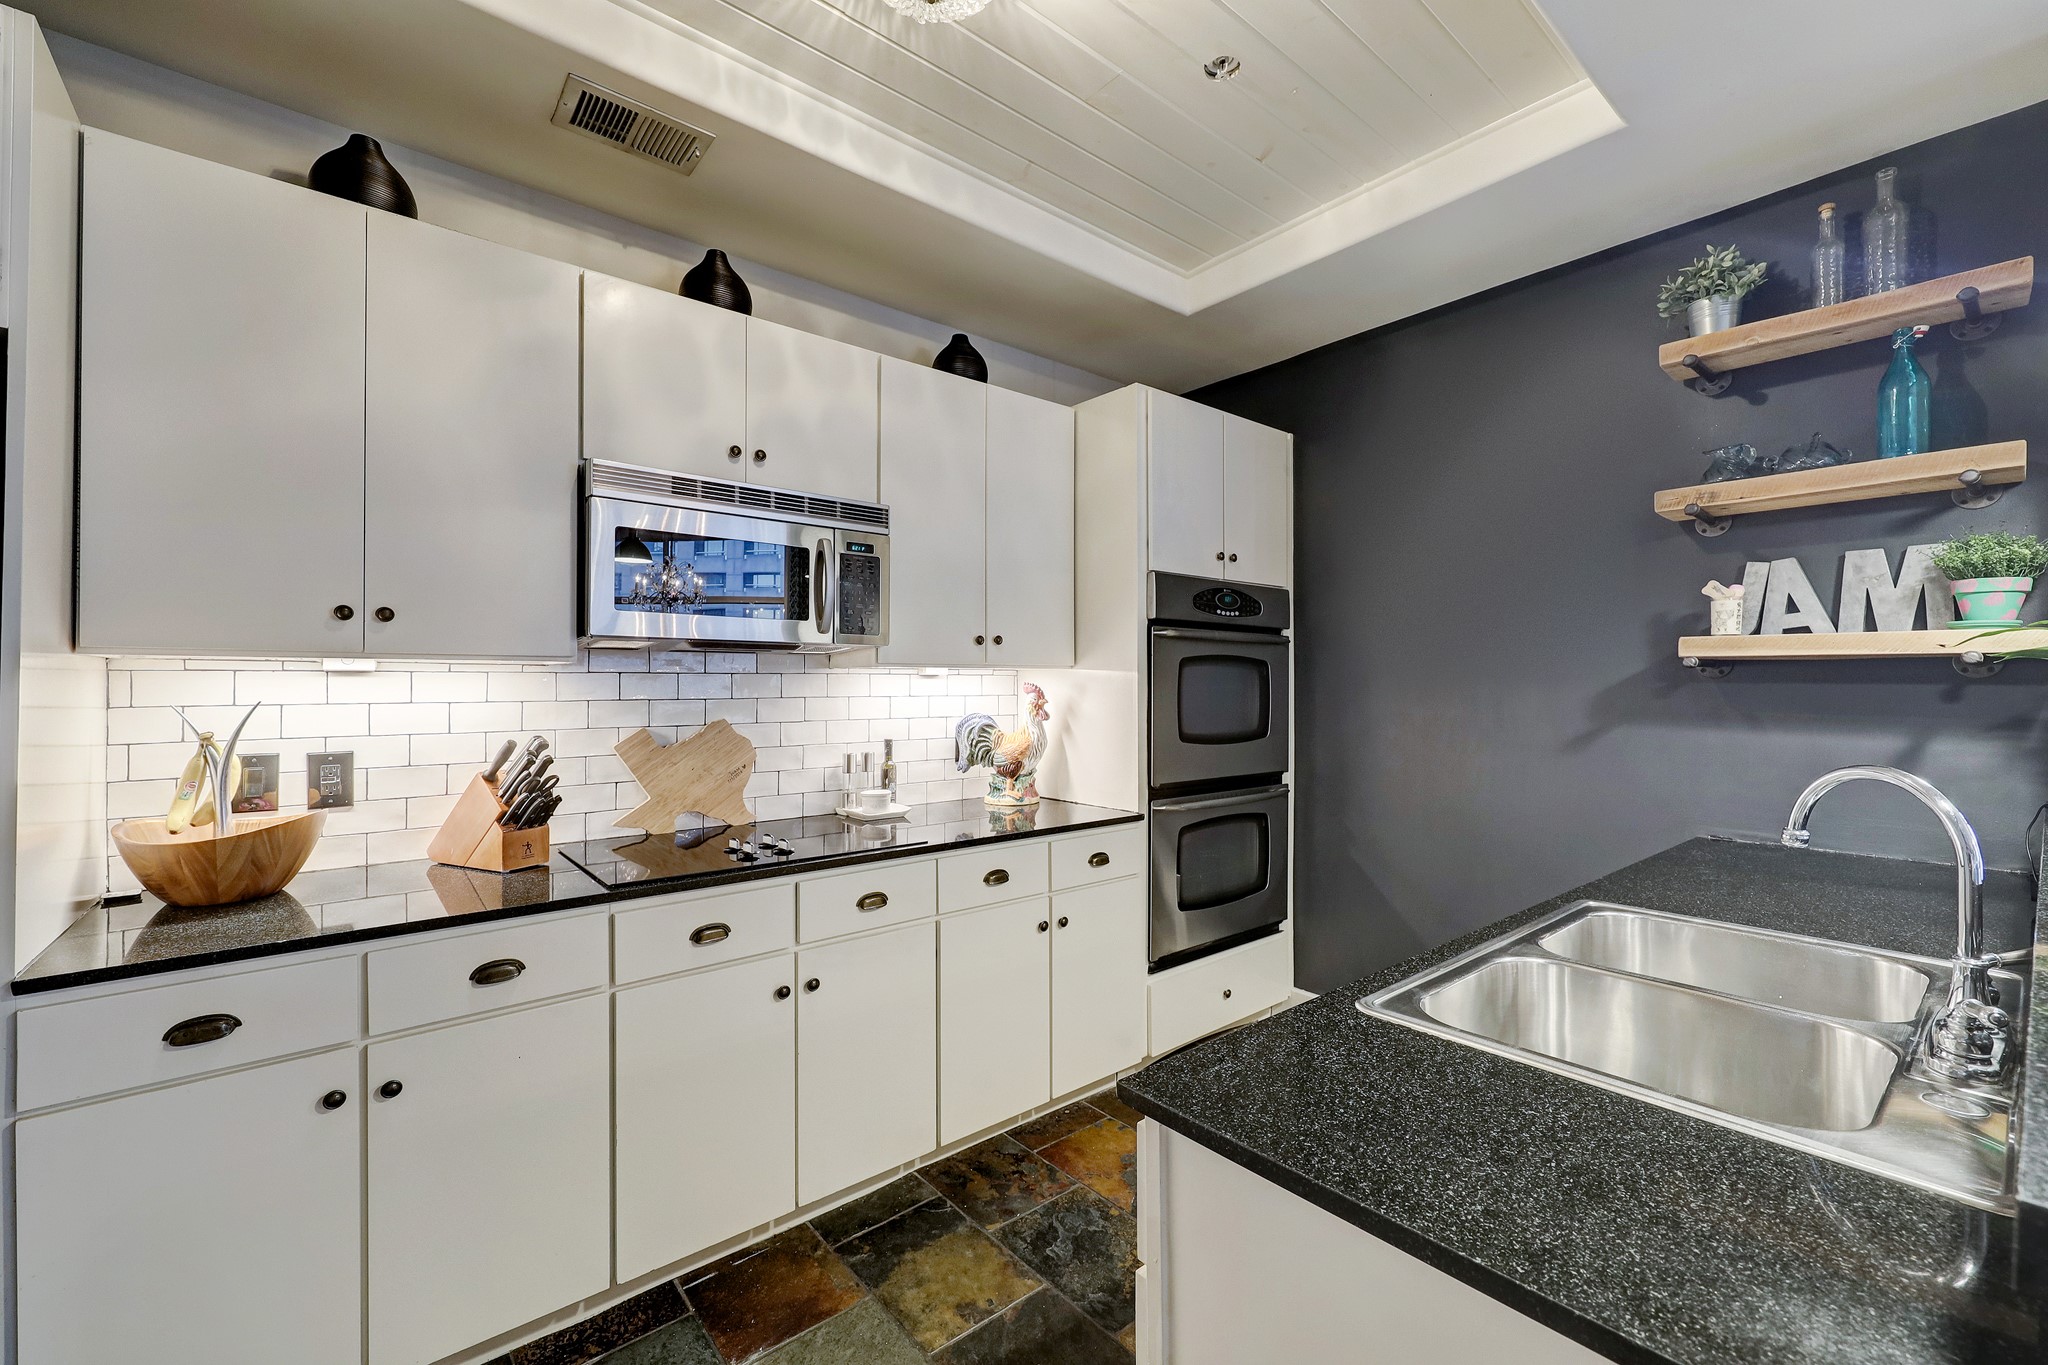 This modern kitchen features freshly painted cabinets, new hardware, white subway tile backsplash, magnet/chalkboard wall with wood shelving, slate tile flooring, elegant lighting and a wood recessed ceiling.